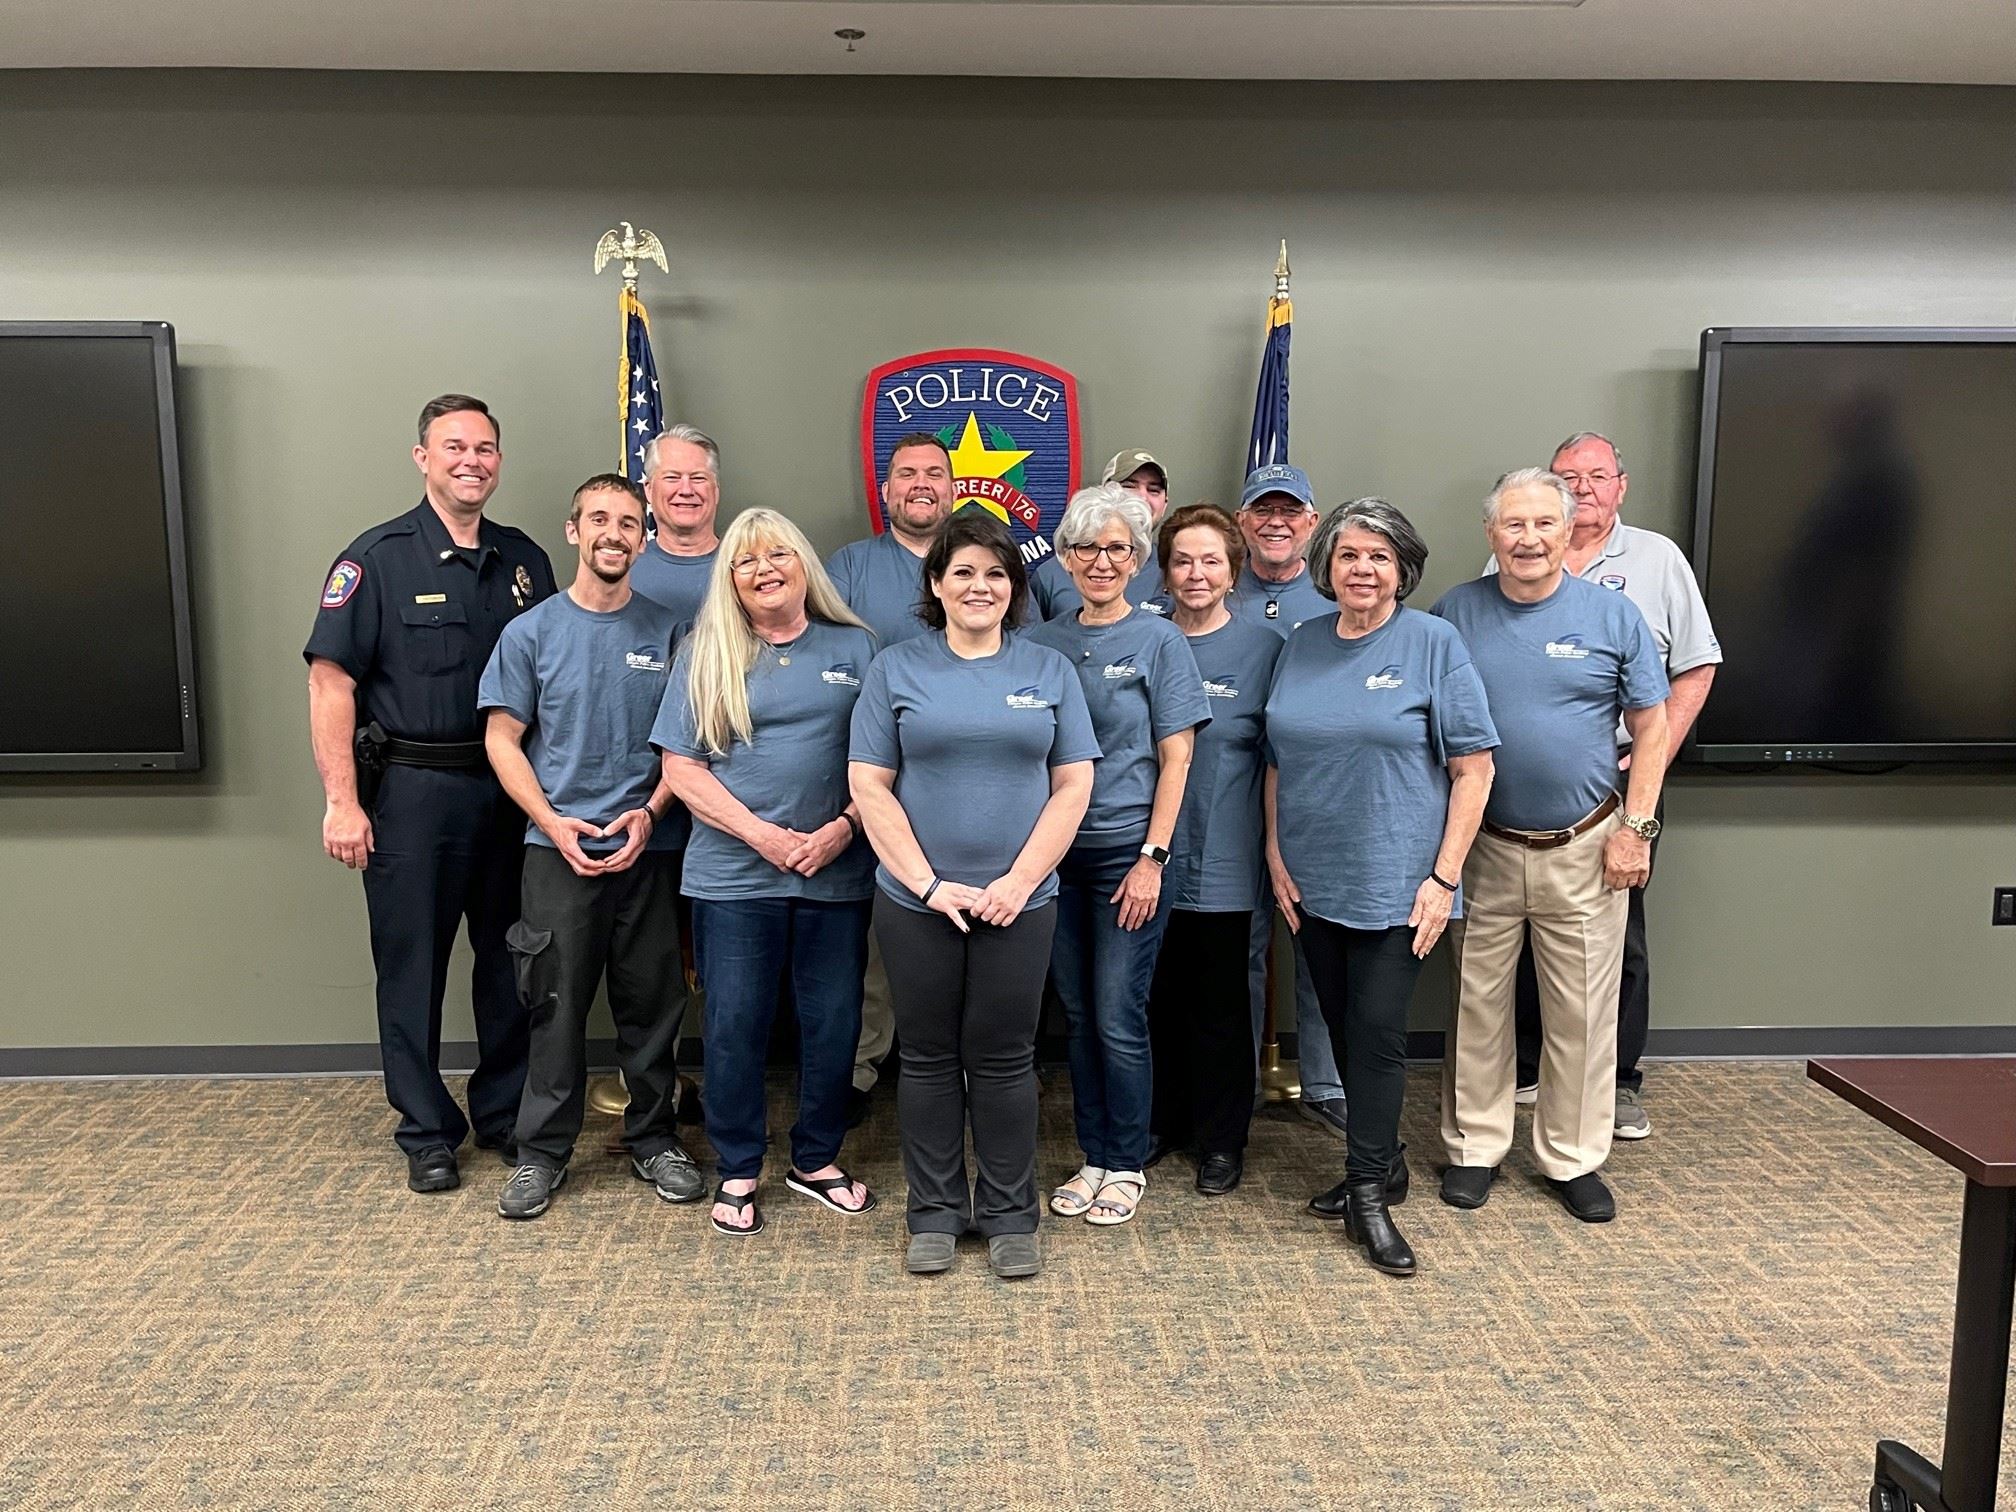 Citizens Police Academy students